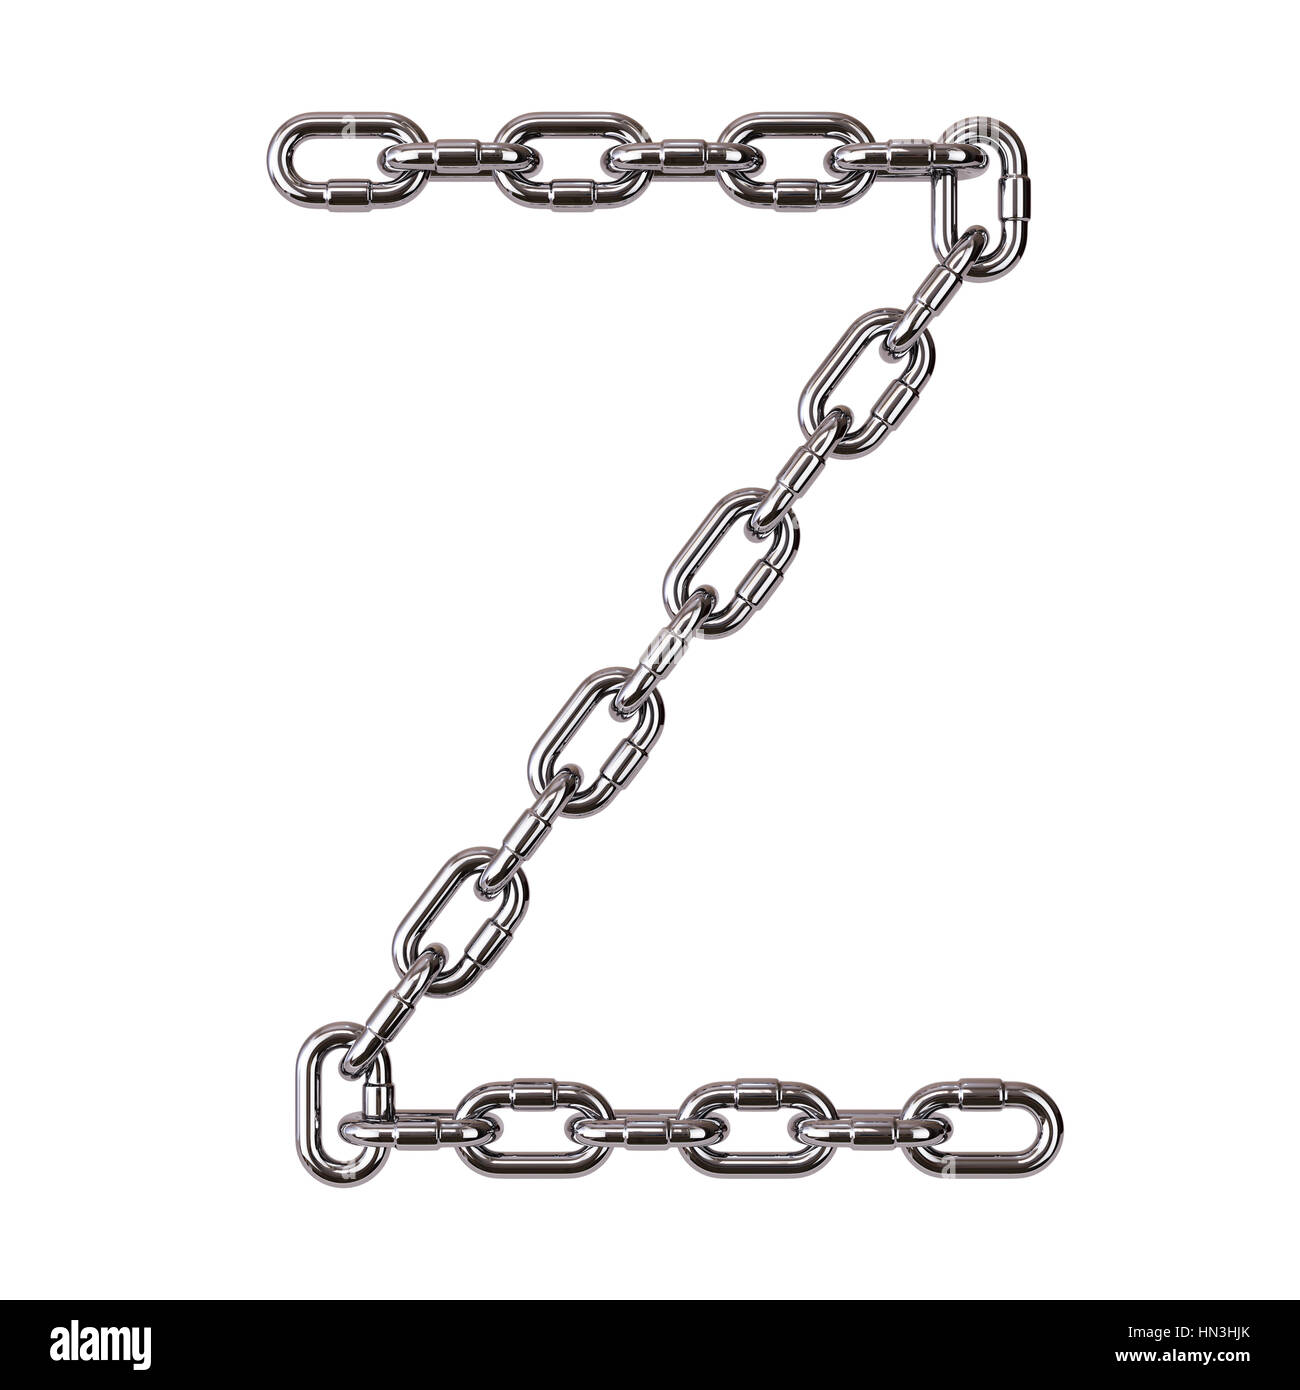 Font Z chrome metal alphabet letter chain. Isolated on white background. 3d rendering Stock Photo